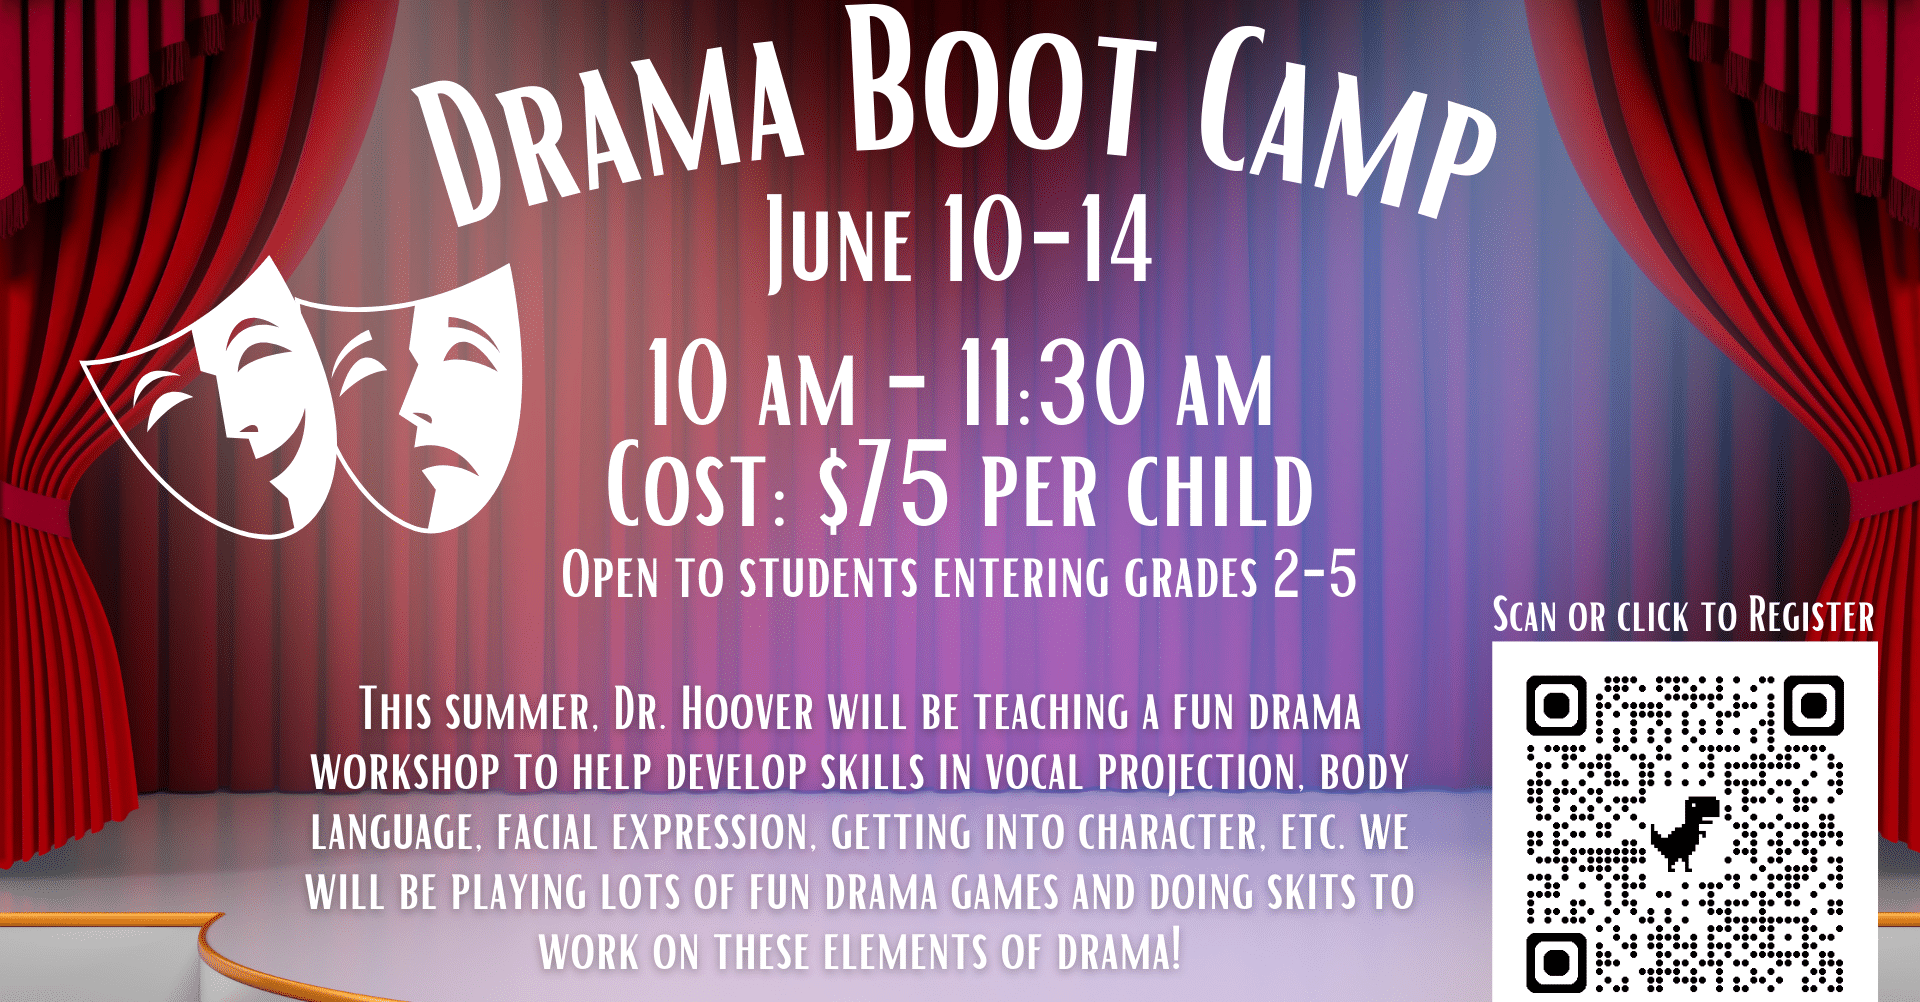 Christian Academy School System | Christian Academy of Louisville | English Station Campus | Drama Boot Camp | June 10-14